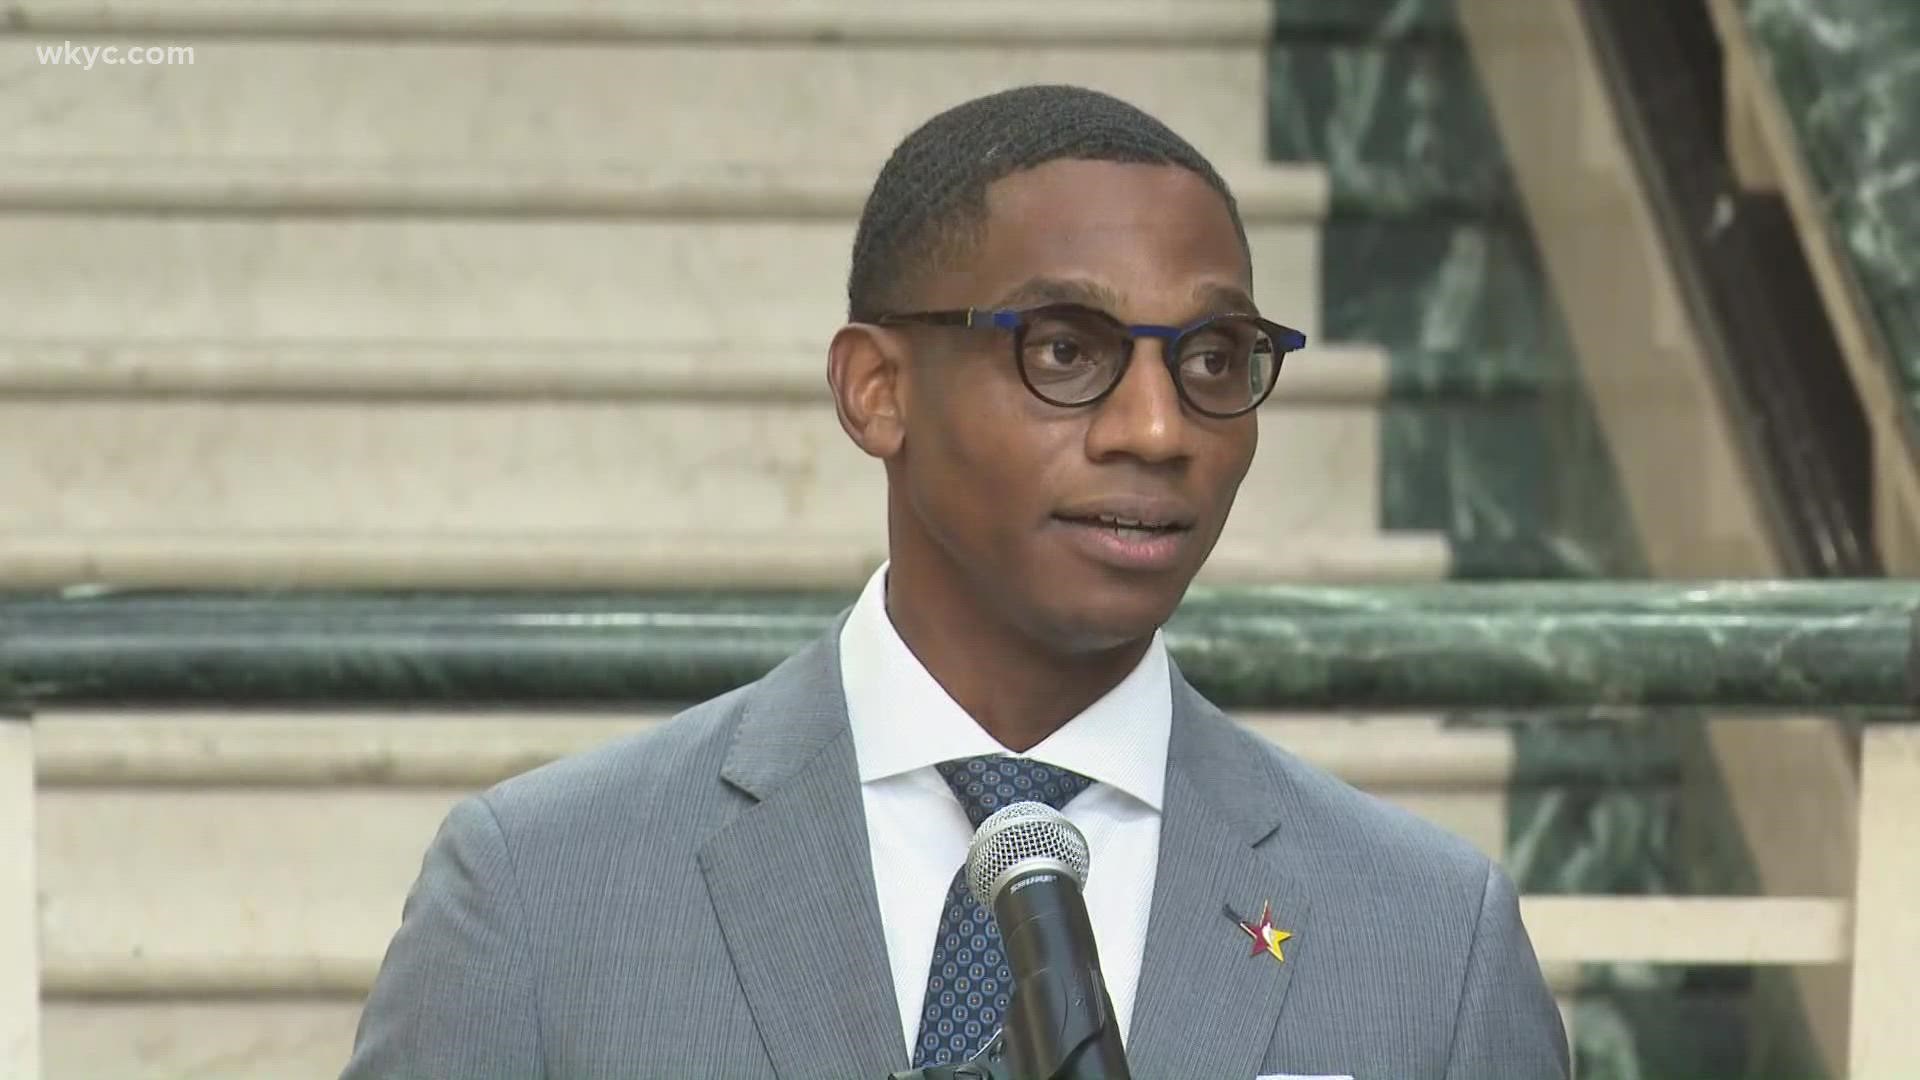 Cleveland Mayor Justin Bibb has outlined the COVID-19 safety precautions being taken as the 2022 NBA All-Star Game arrives in Cleveland.